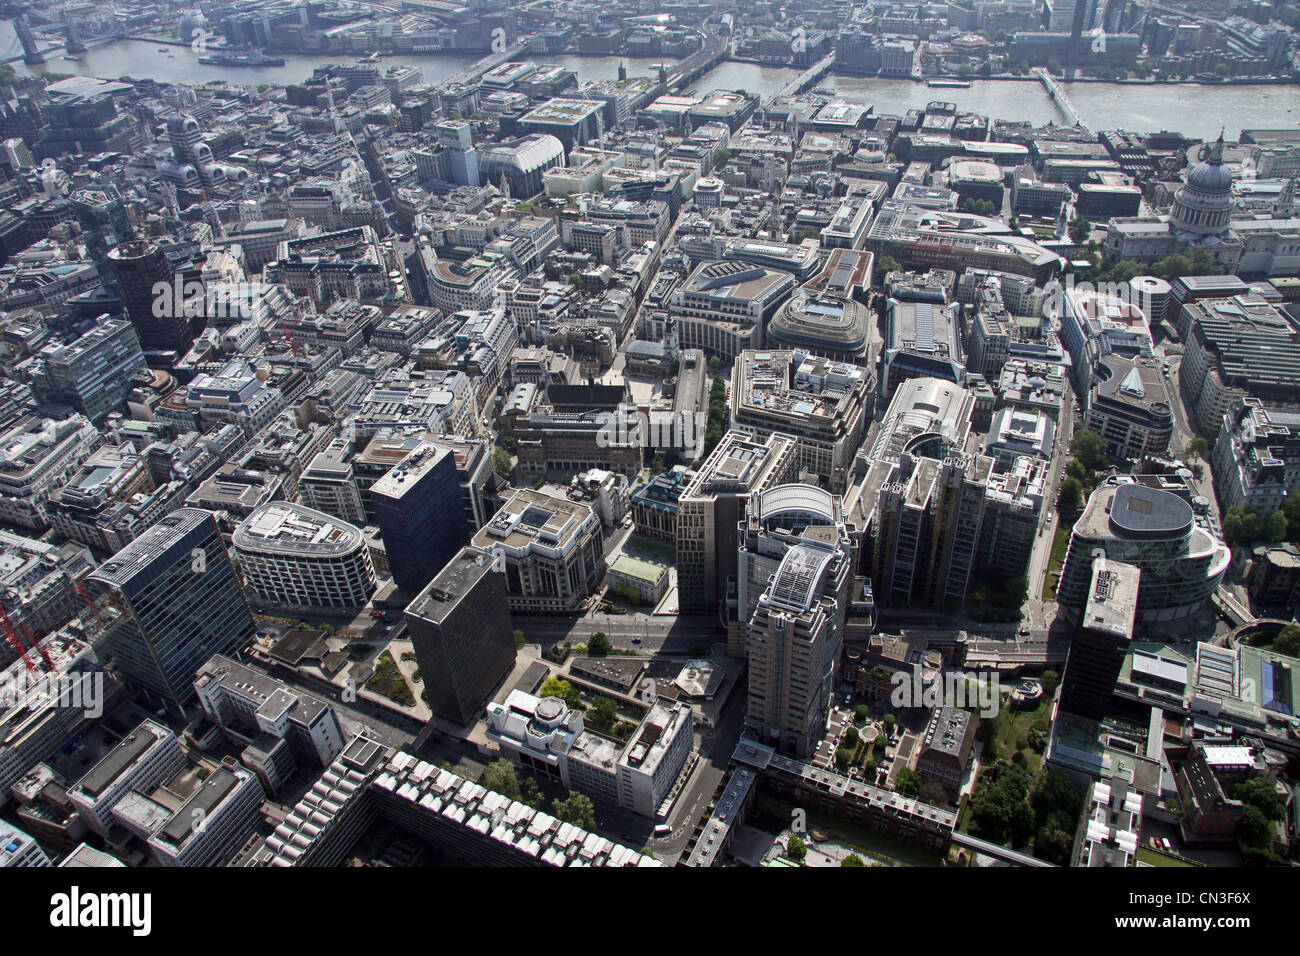 Aerial view with the A1211 London Wall road across the bottom of the picture, looking south towards the Thames, London Stock Photo